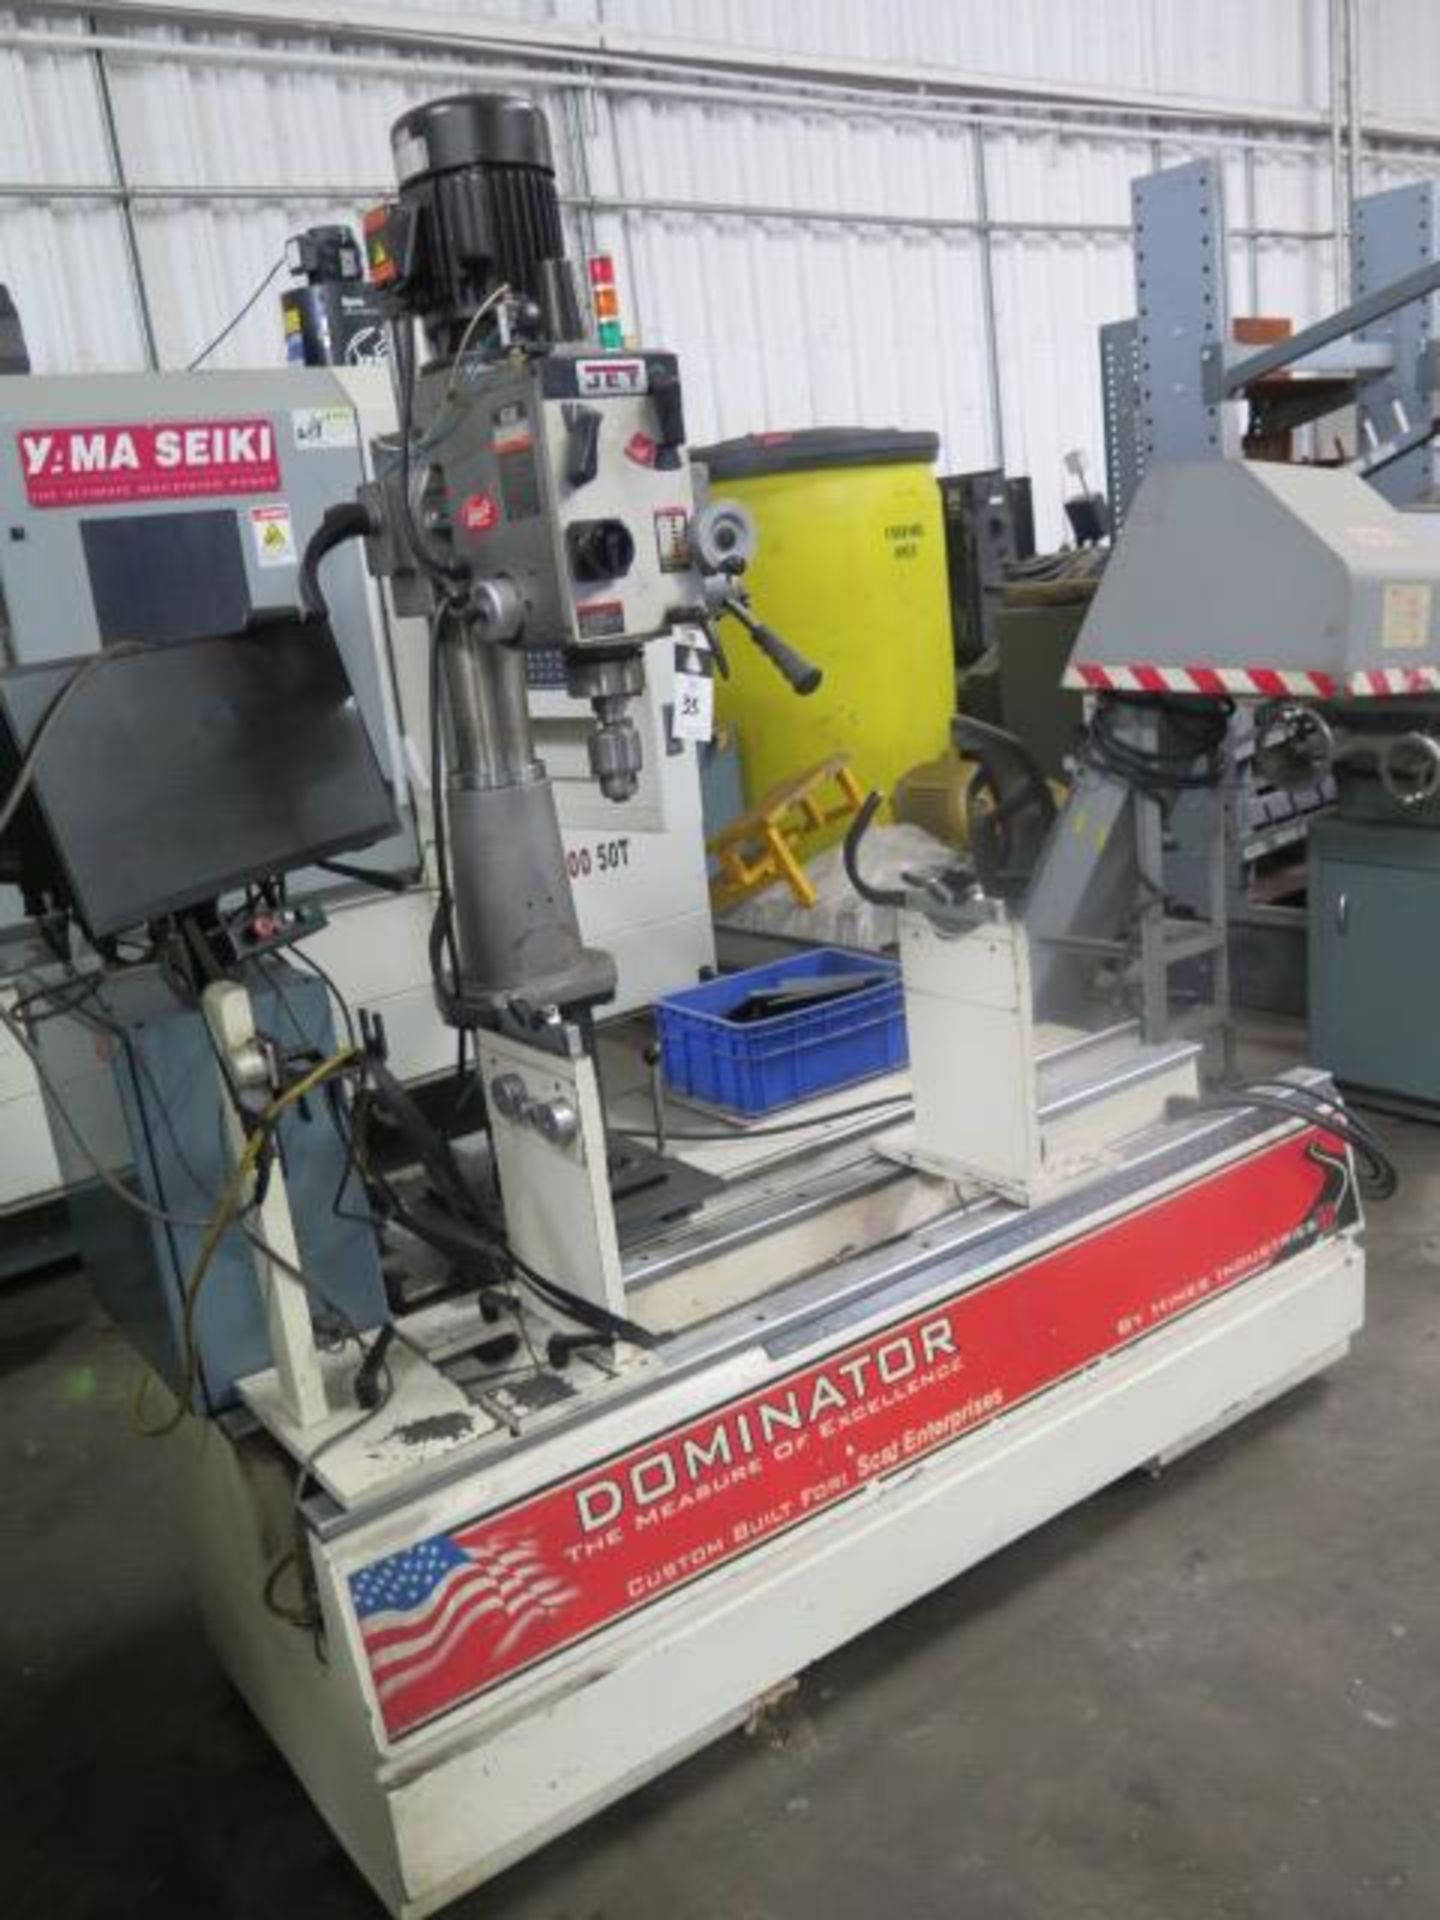 Hines "Dominator" Crank Shaft Balance Drilling Machine w/ Jet Drilling Head SOLD AS-IS - Image 3 of 12